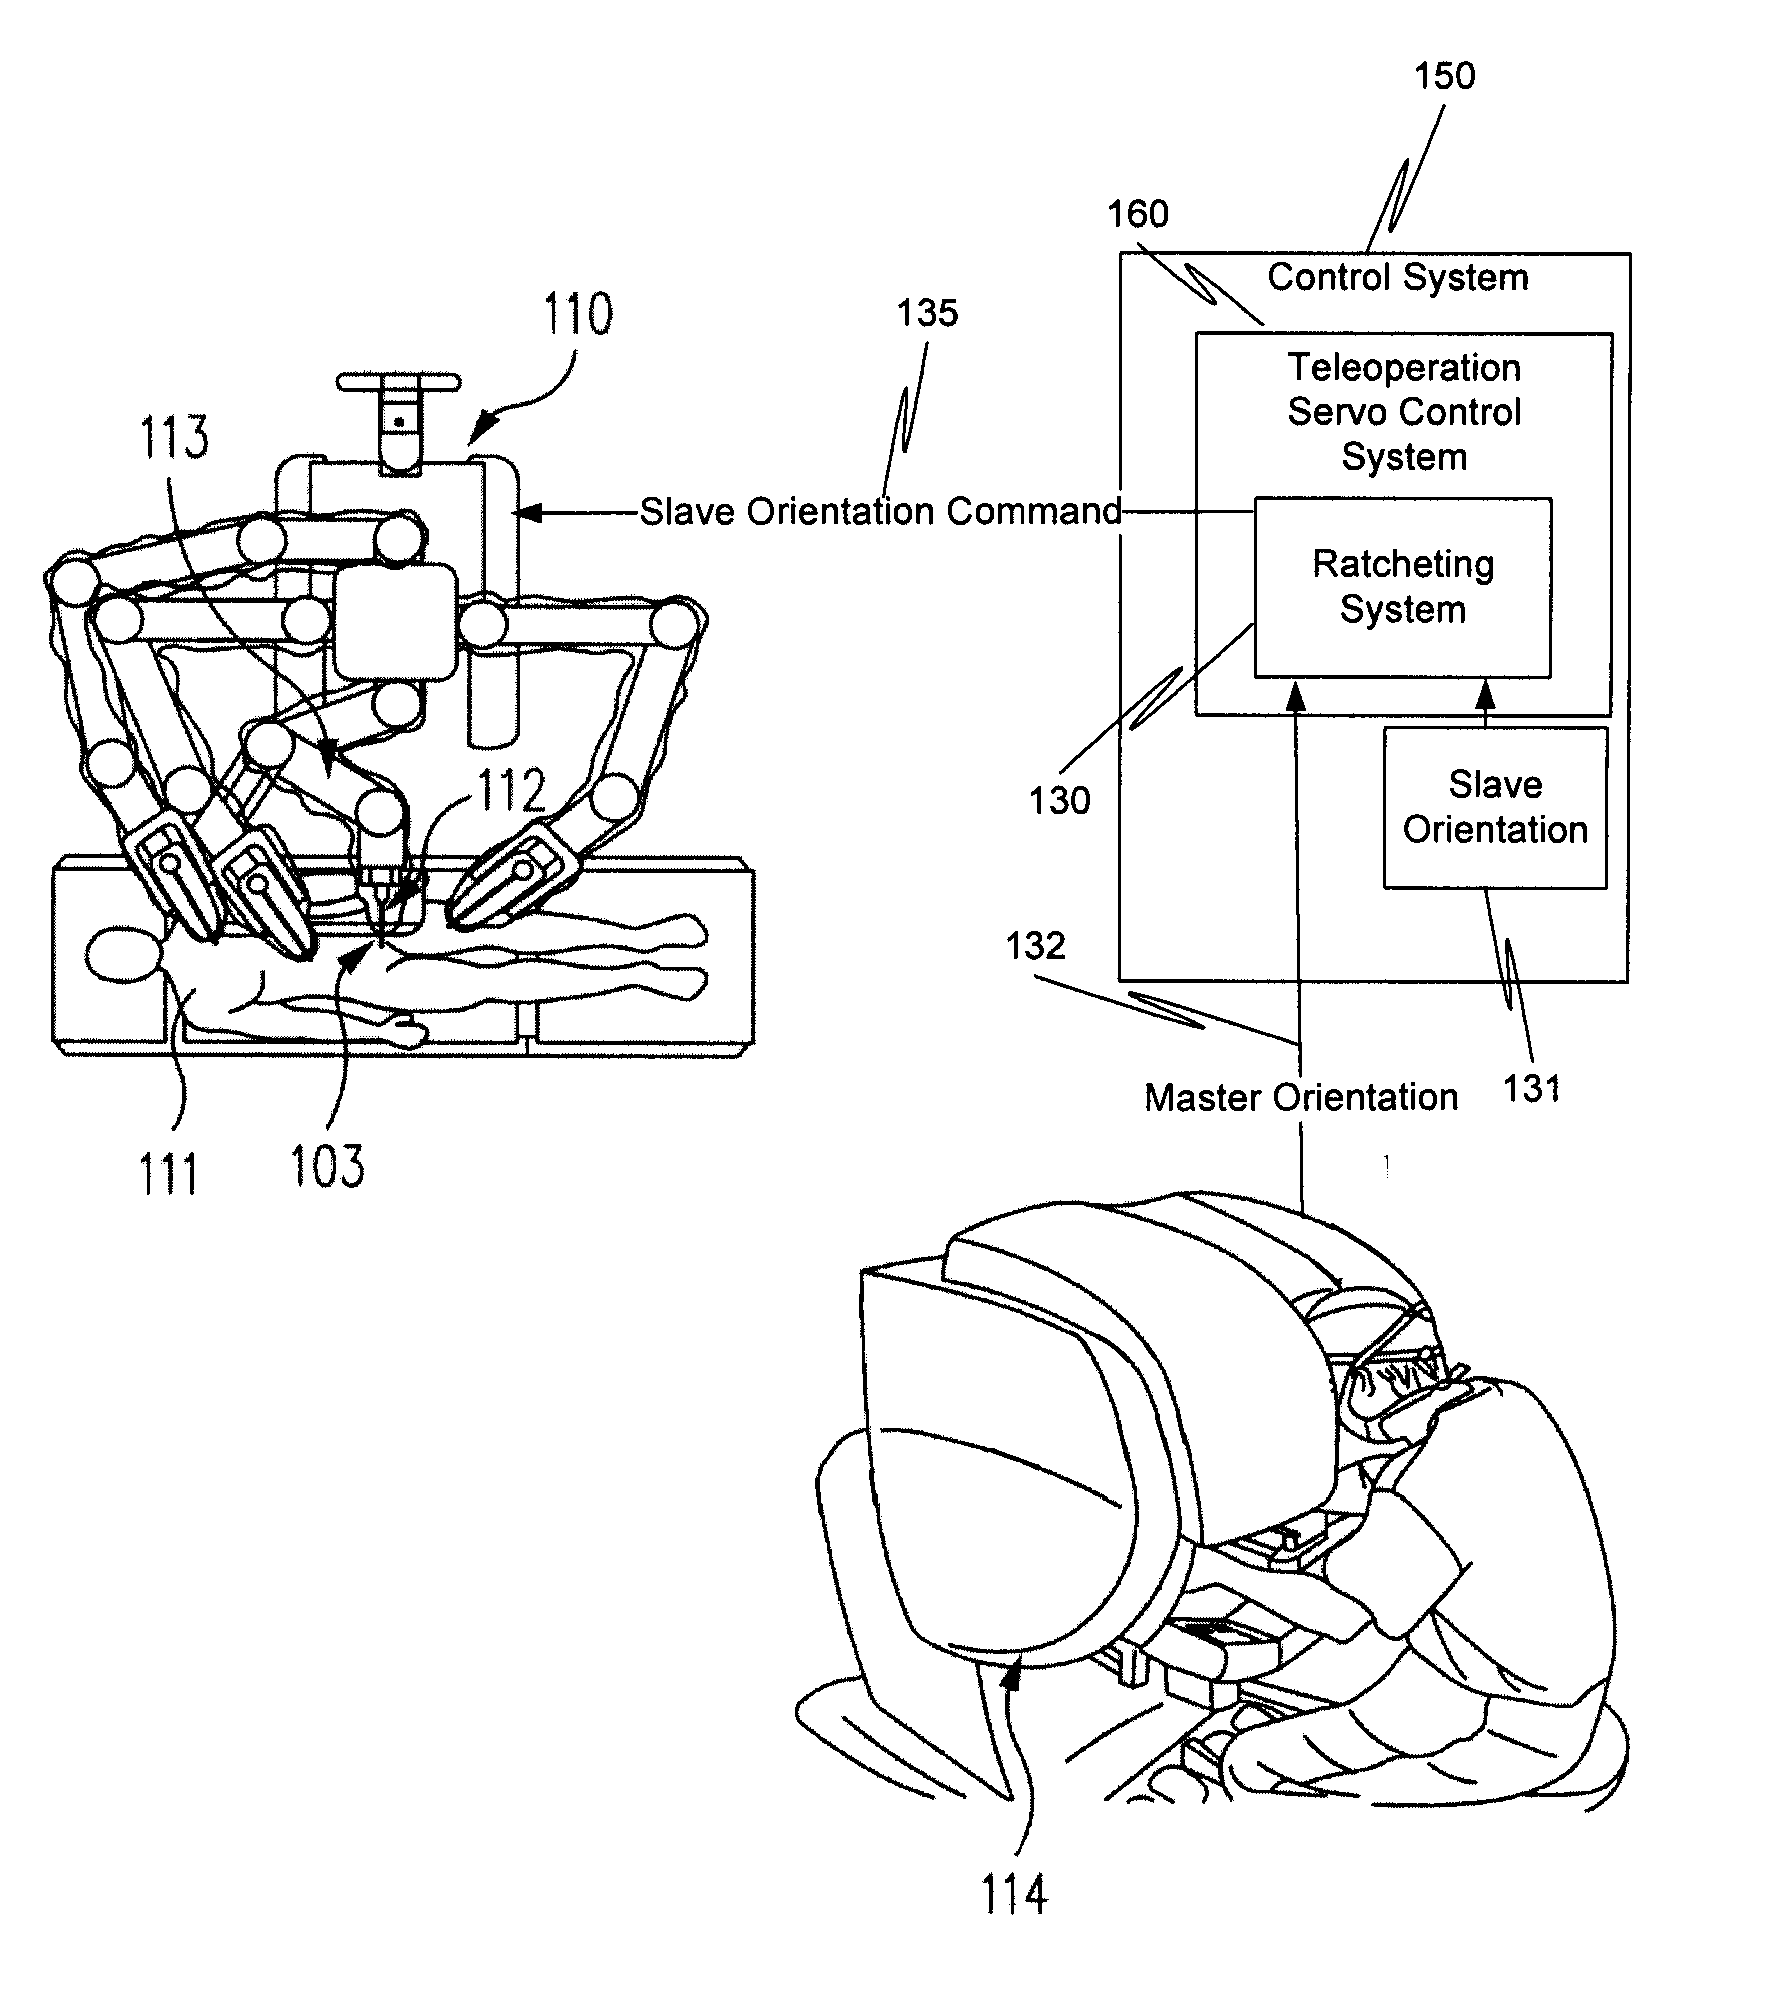 Ratcheting for master alignment of a teleoperated minimally-invasive surgical instrument